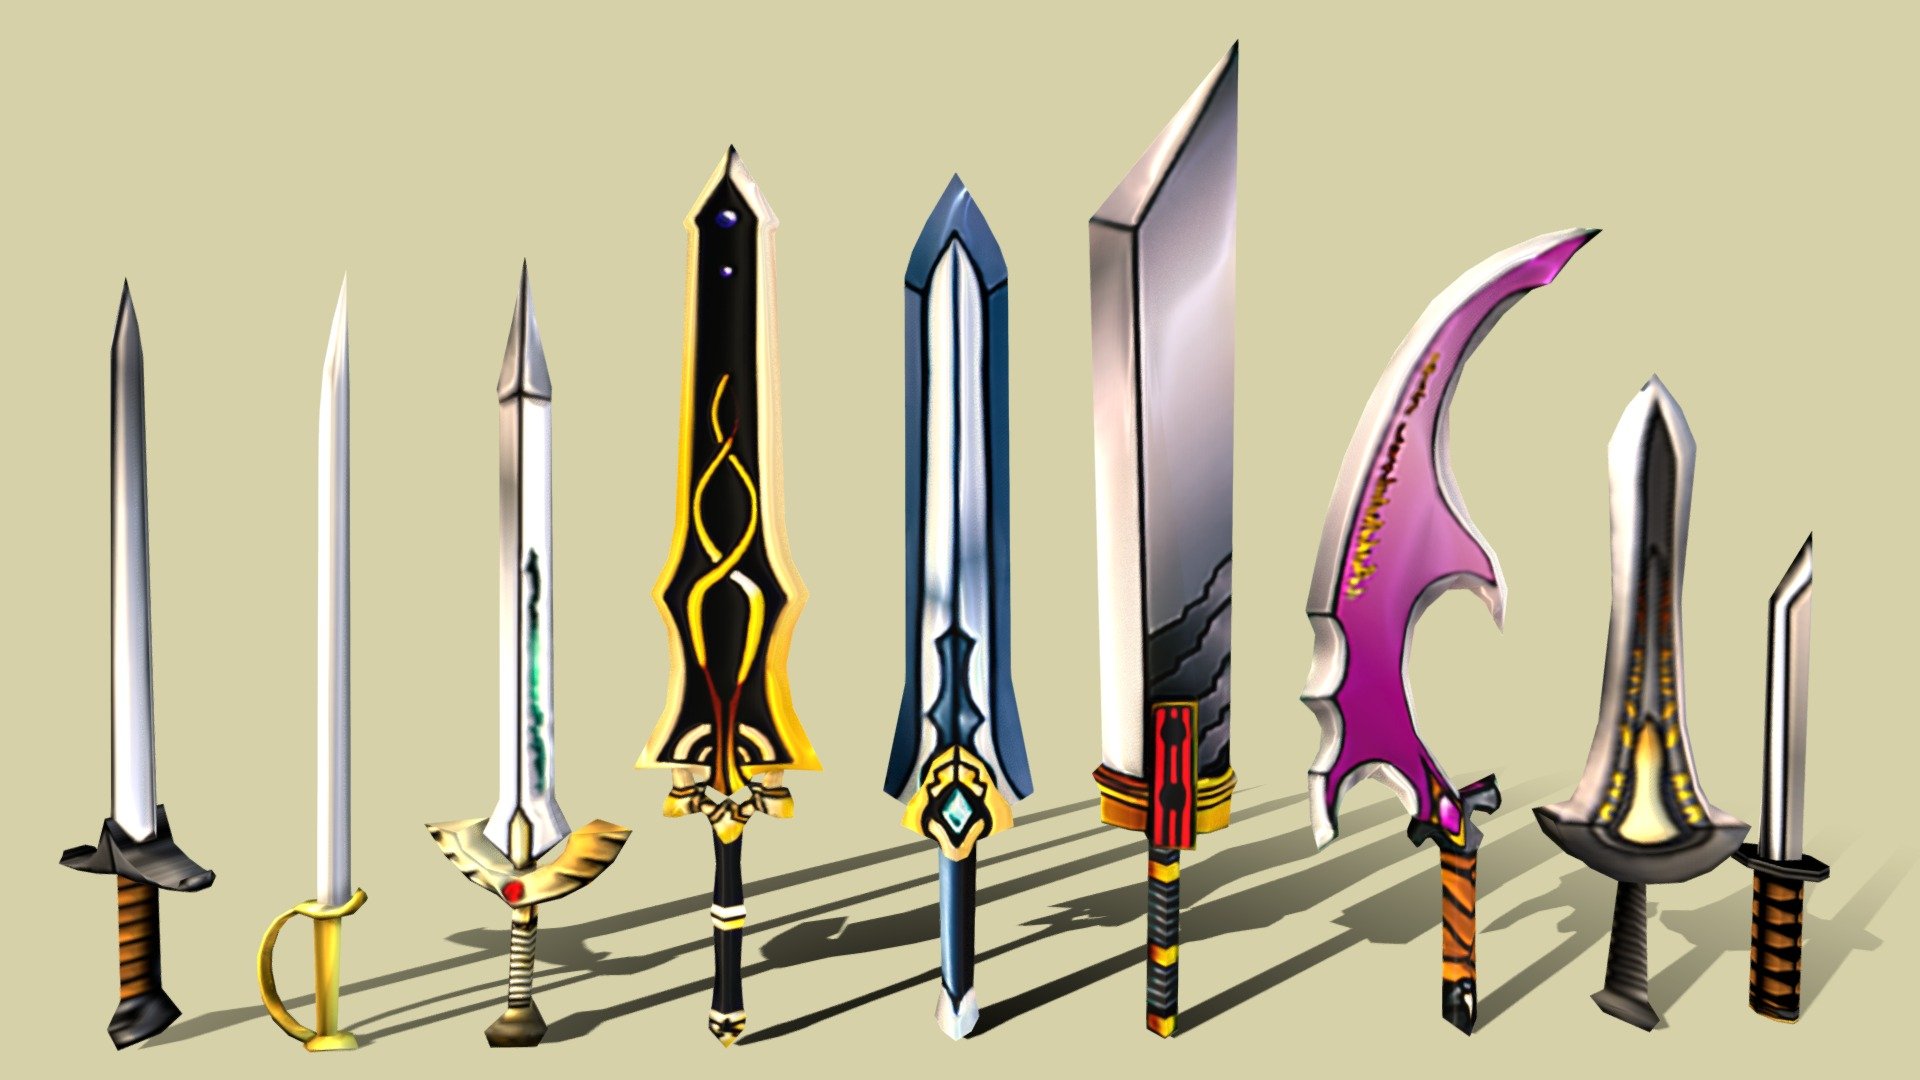 9 swords pack (4 two-handed / 5 one-handed)

1529 tris in total (the 9 swords)

Albedo / NM / AO / Metallic

origins on hand point

Doubts or budgets to =&gt; leo.alivenergy@gmail.com or http://www.fastskillteam.com/
 - Ultra Low Poly Swords Pack - Download Free 3D model by Leonardo Carvalho (@livrosparacriancas) 3d model